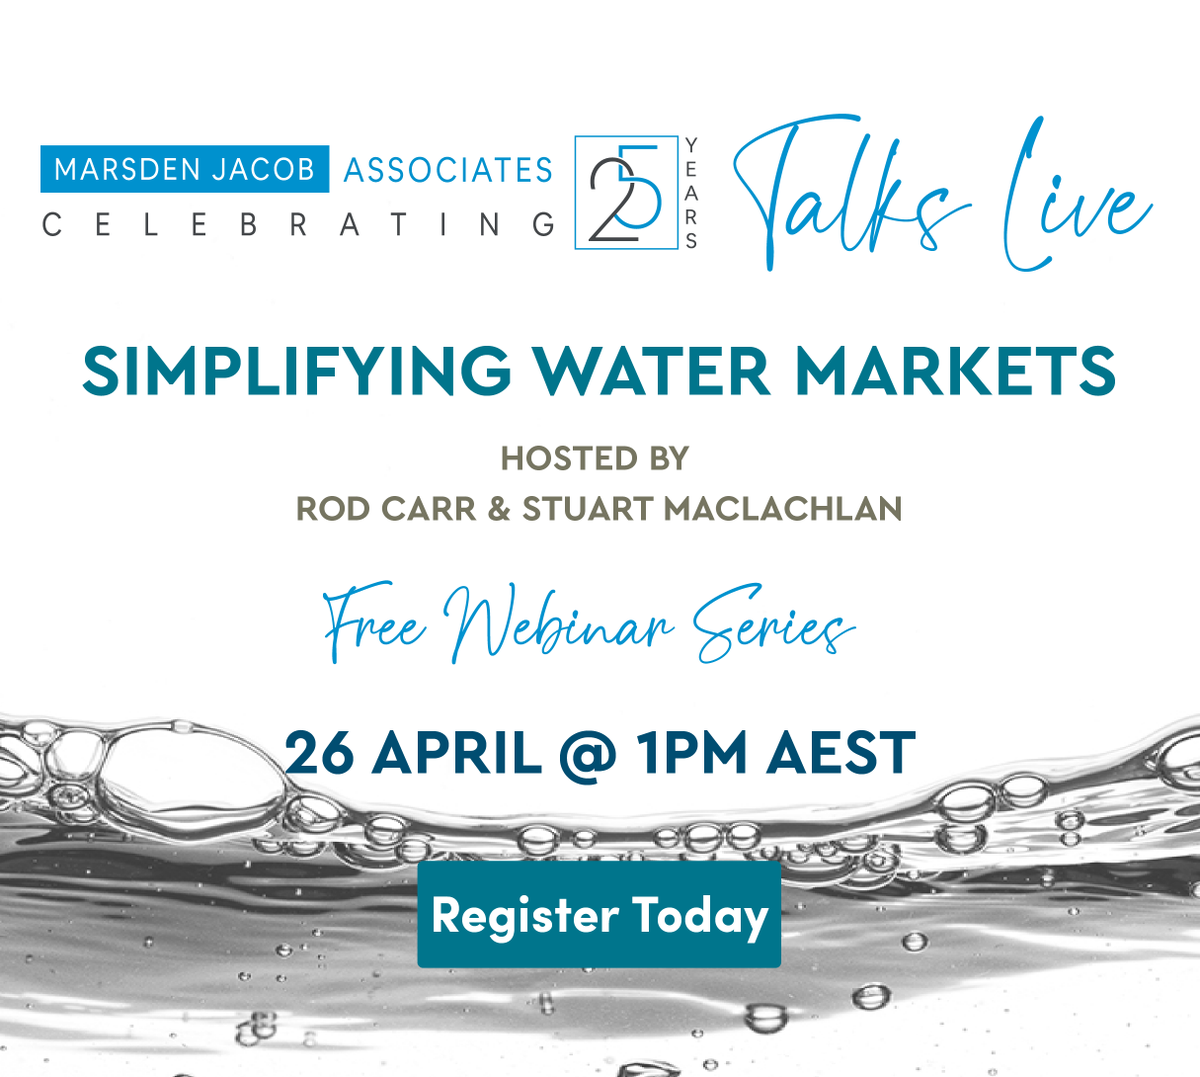 Want to learn more about Australian #watermarket trading? Register for our #freewebinar on Simplifying Water Markets, co-hosted by @WaterflowAU & Marsden Jacob Director Rod Carr. Tues 26 April @1pm (AEST). Register Today bit.ly/3M6rcJ3